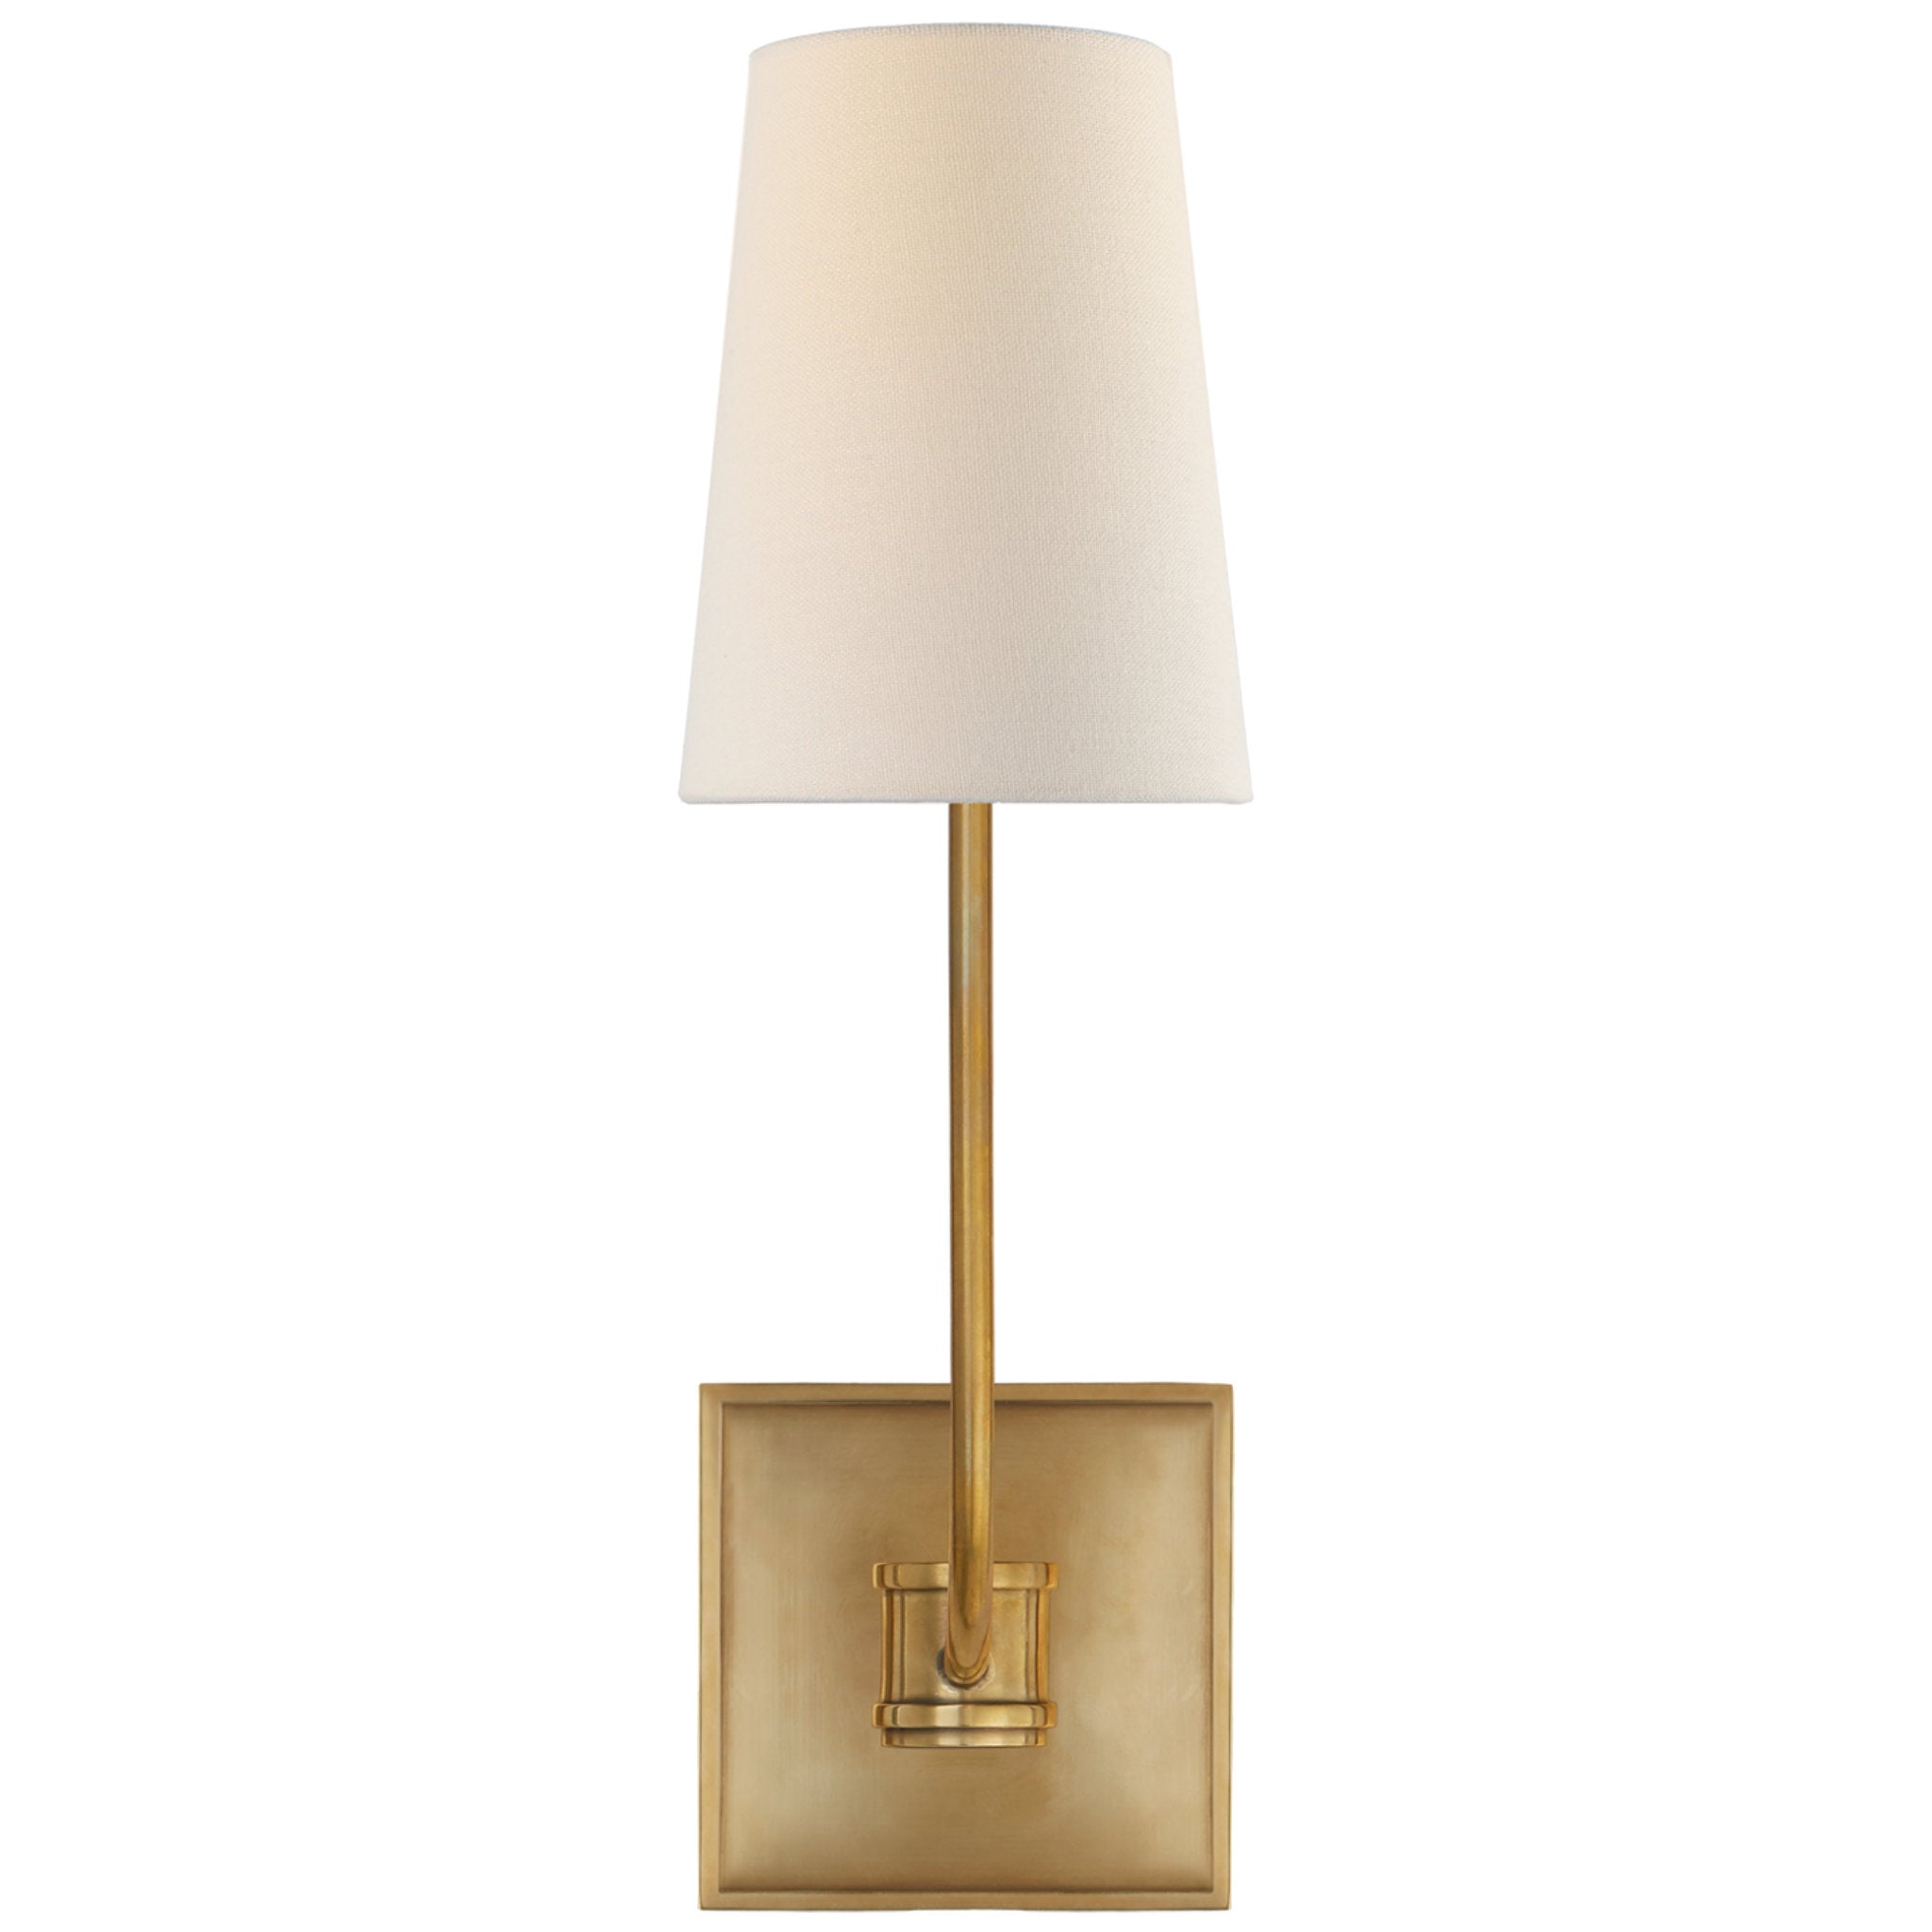 Chapman & Myers Venini Single Sconce in Antique-Burnished Brass with L